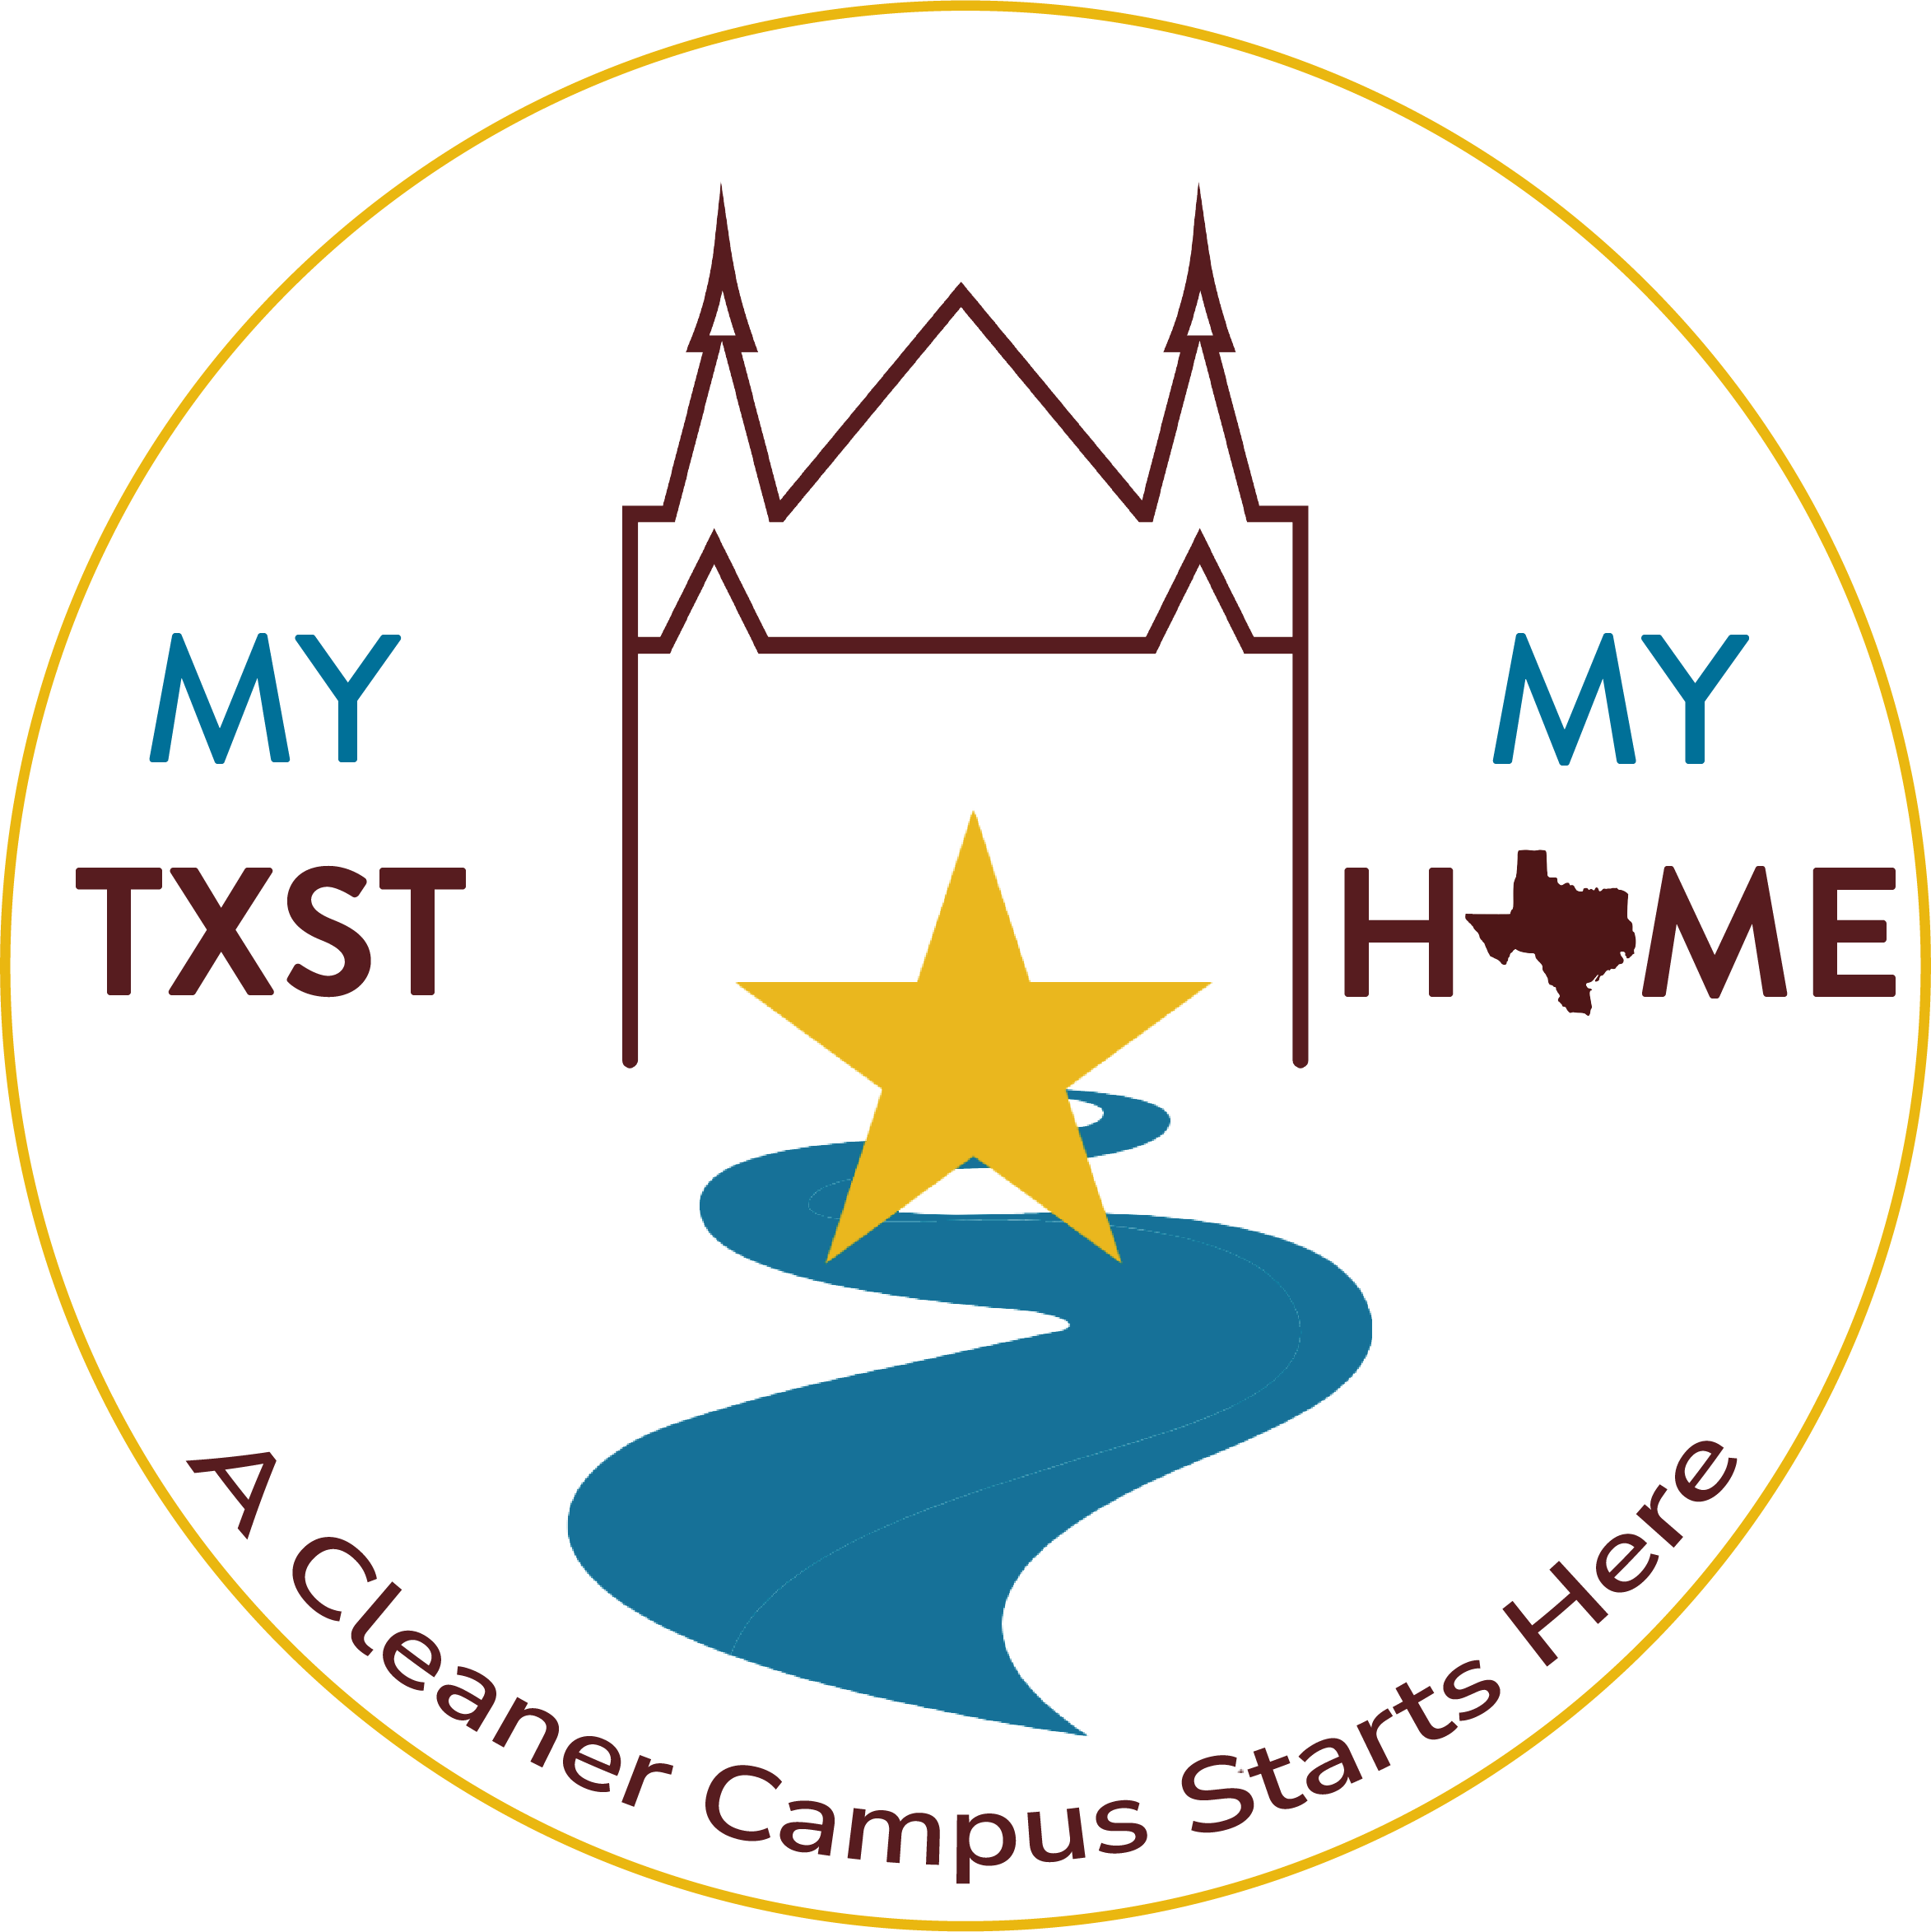 Logo for the MY TXST MY HOME campaign features yellow circle with a graphic of Old Main the middle. Inside Old Main there is a yellow star with river running up to the star. On the left side of Old Main are the words MY TXST and on the right side are the words MY HOME, with the O being created by the shape of Texas. At the bottom of the circle are the words A Cleaner Campus Starts Here. 